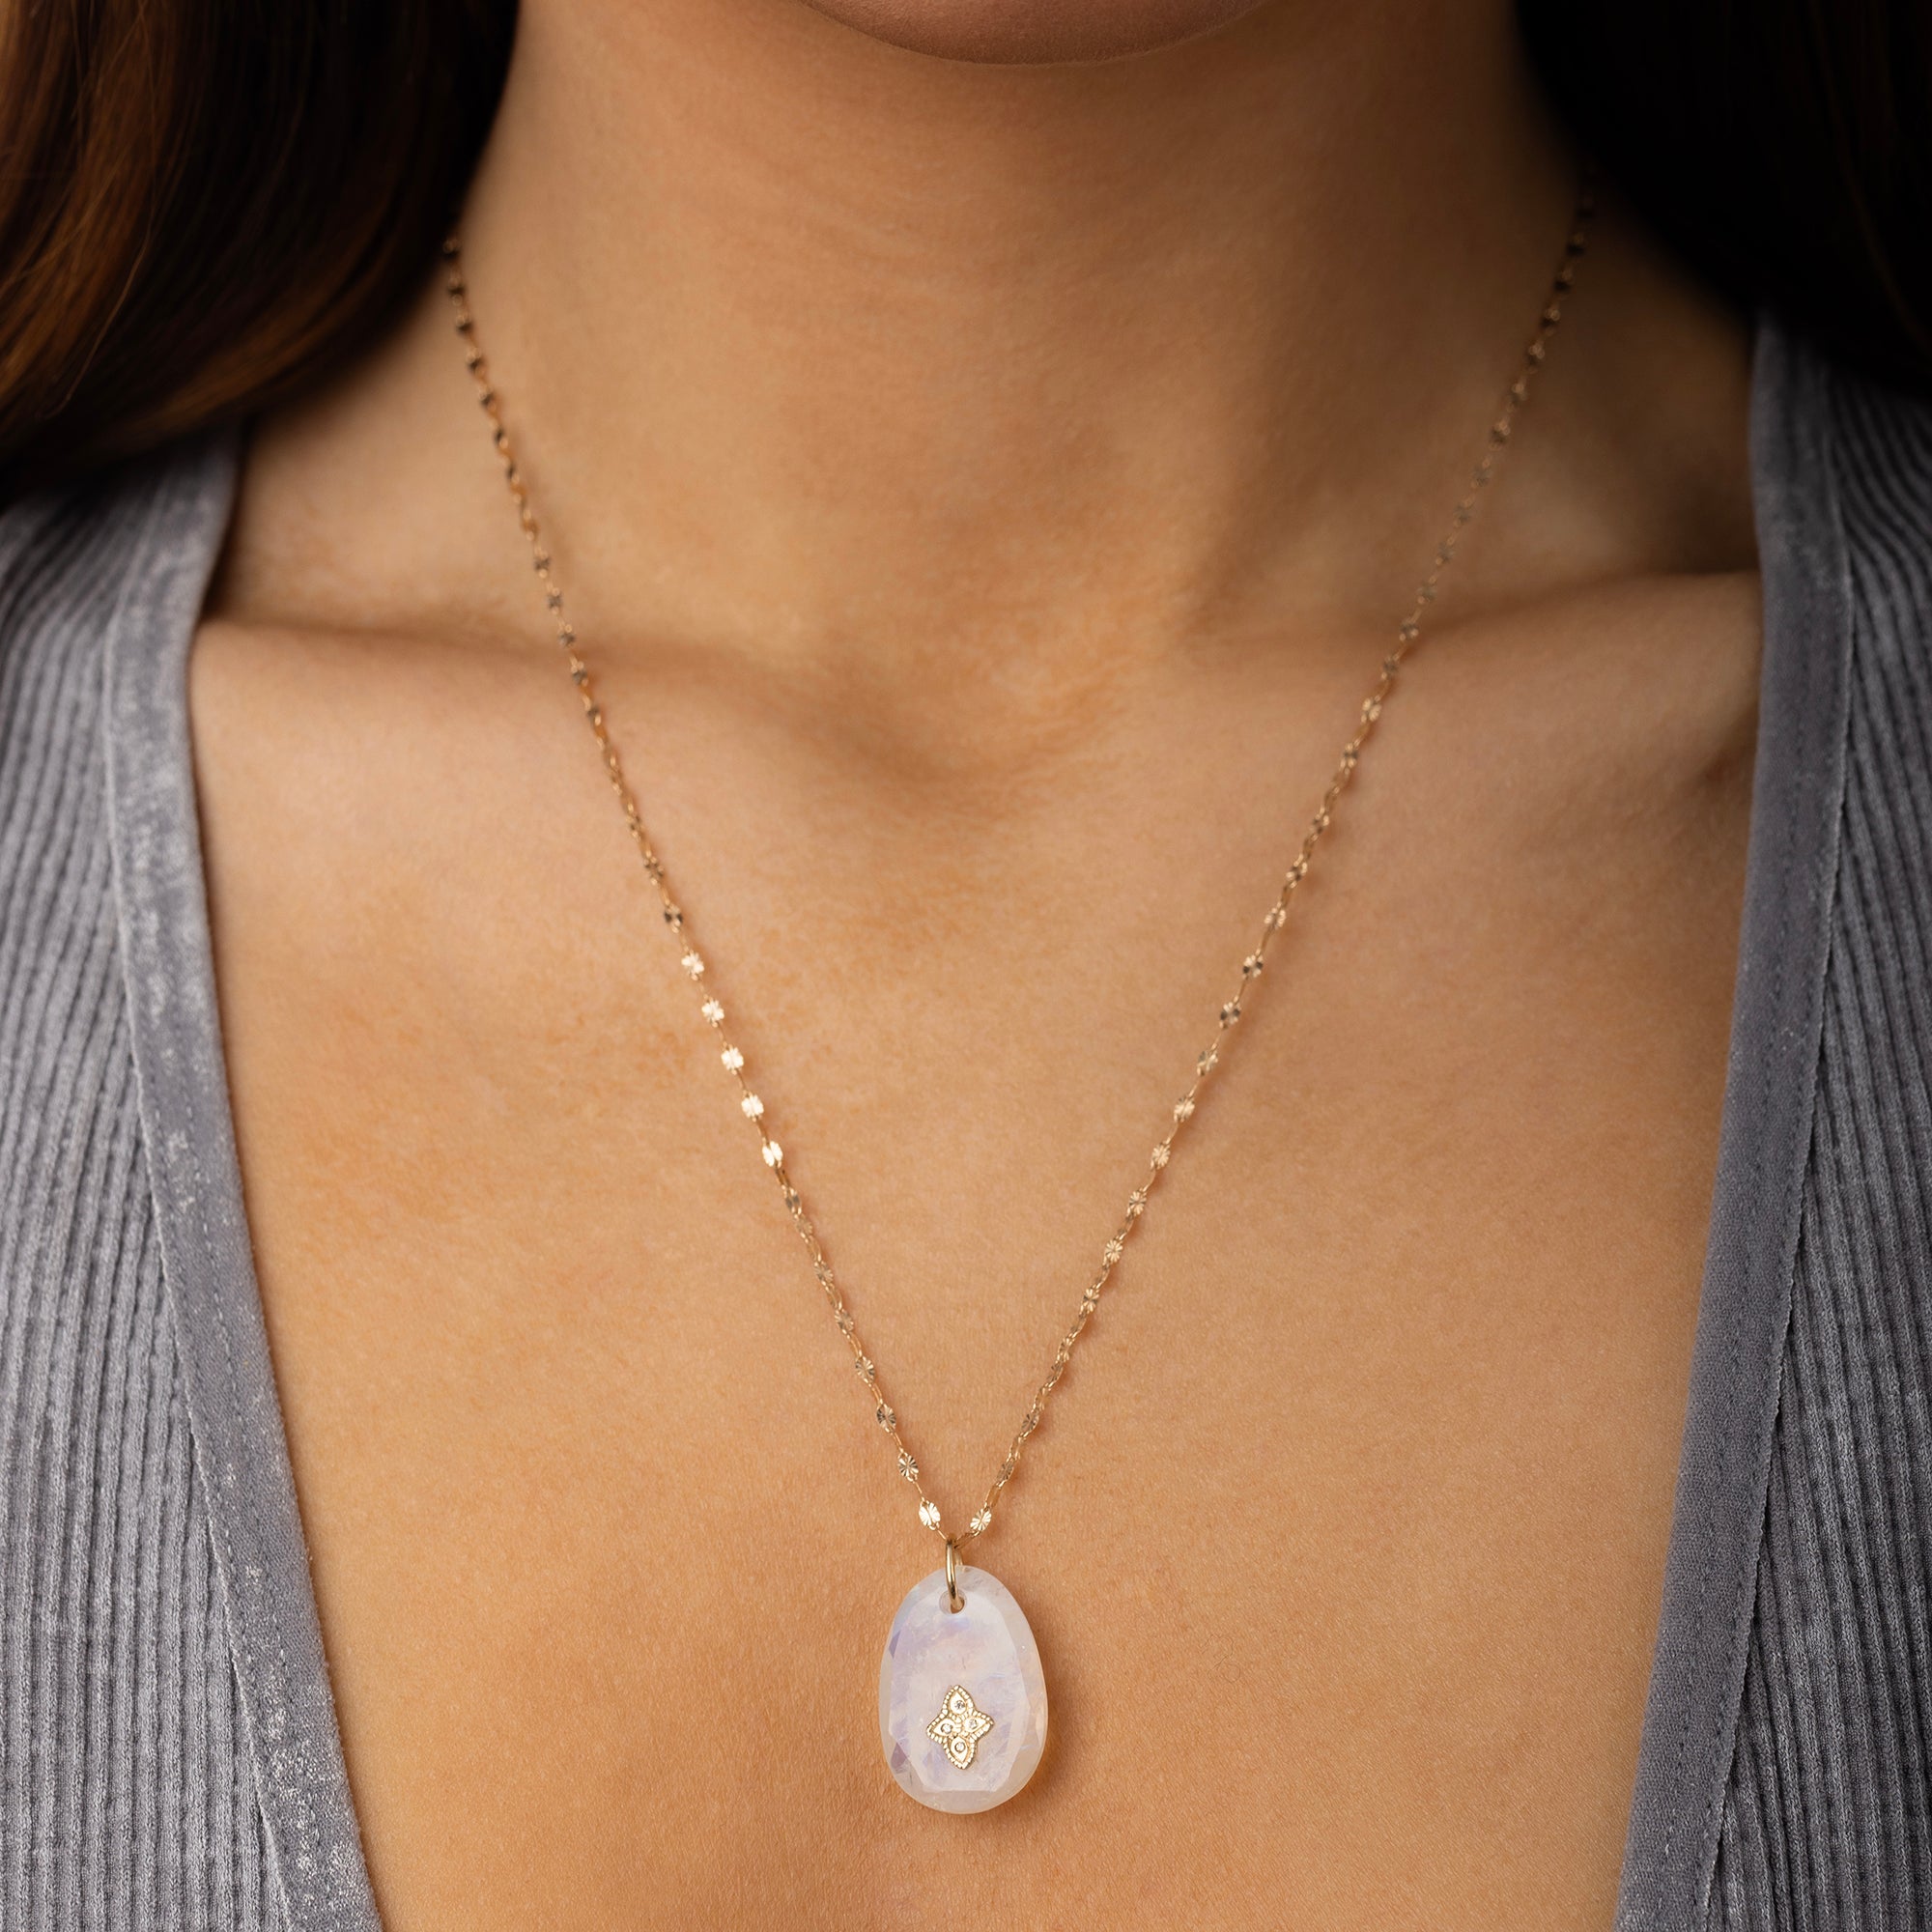 Gaia necklace n°1 Moonstone